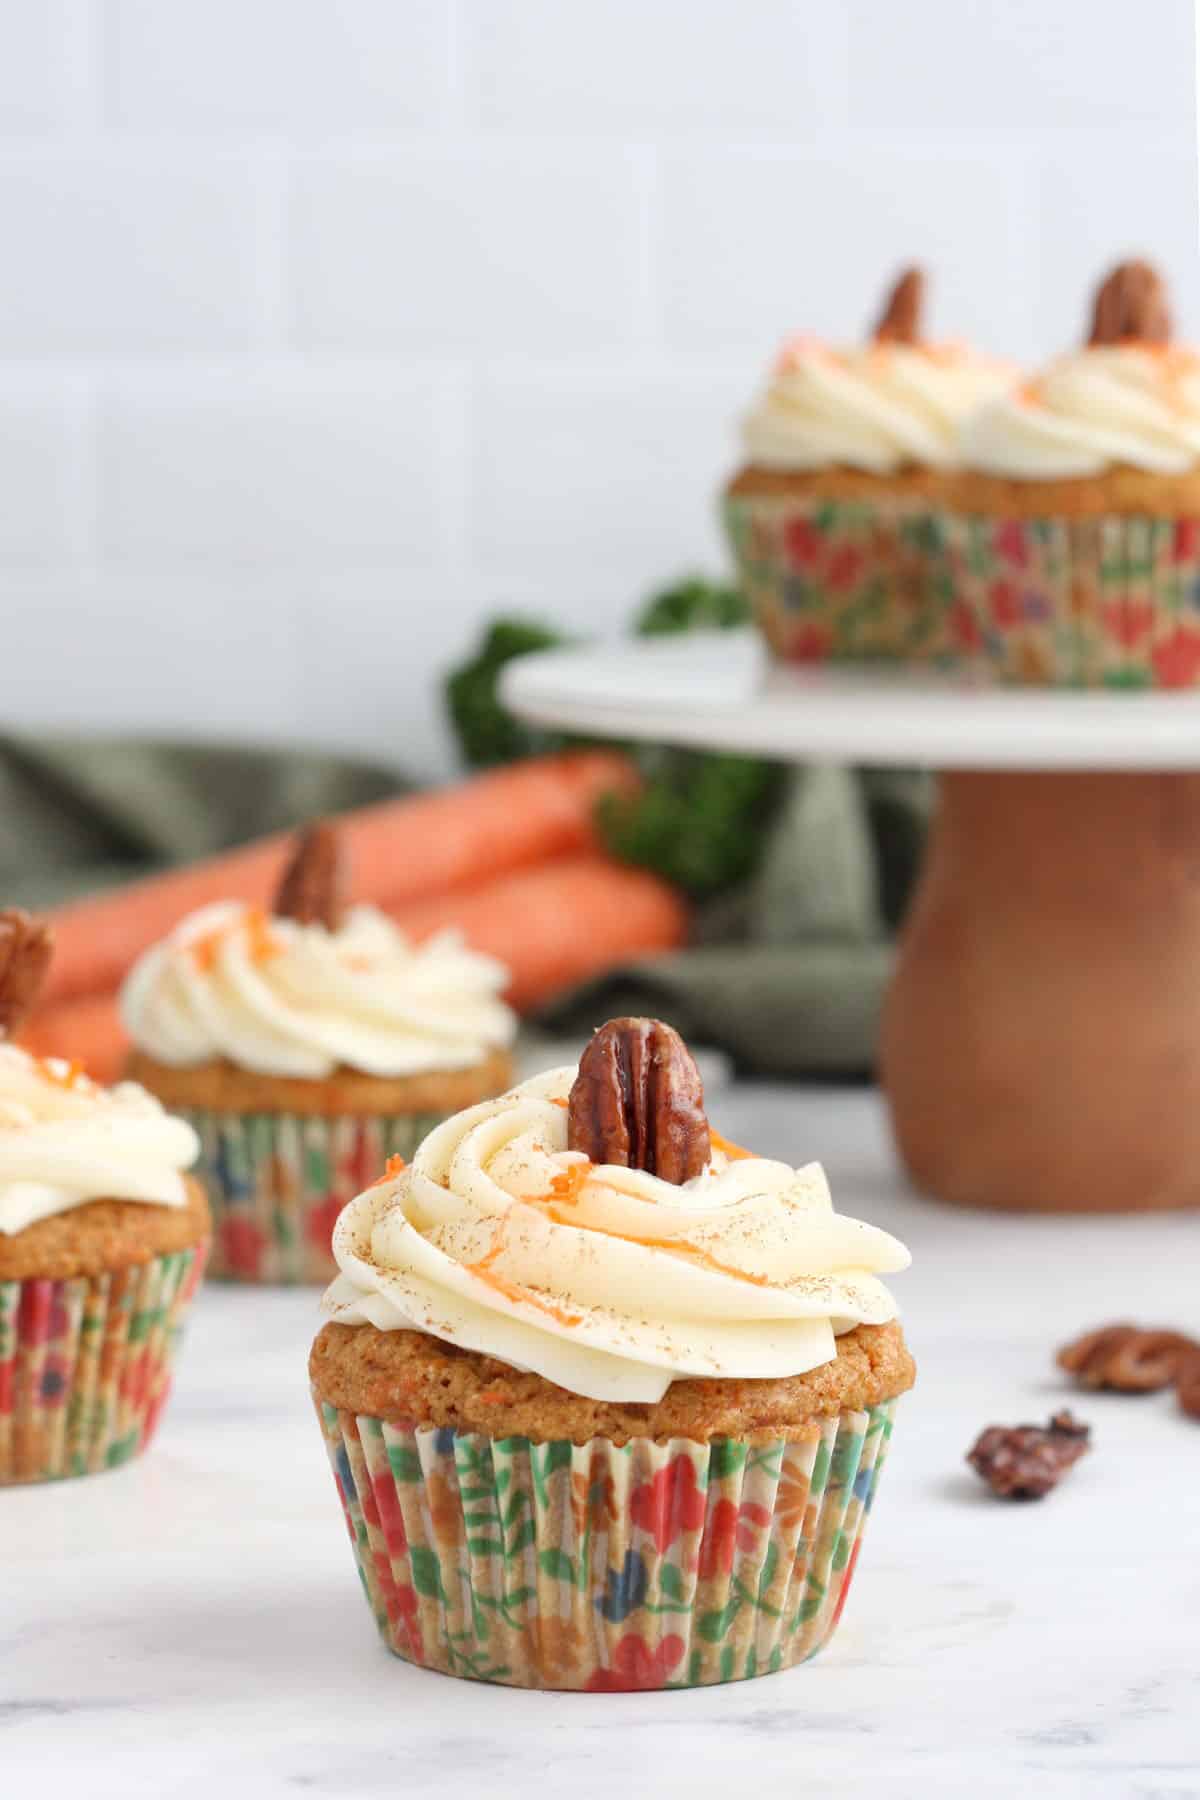 Carrot cake with cream cheese frosting and glazed pecans